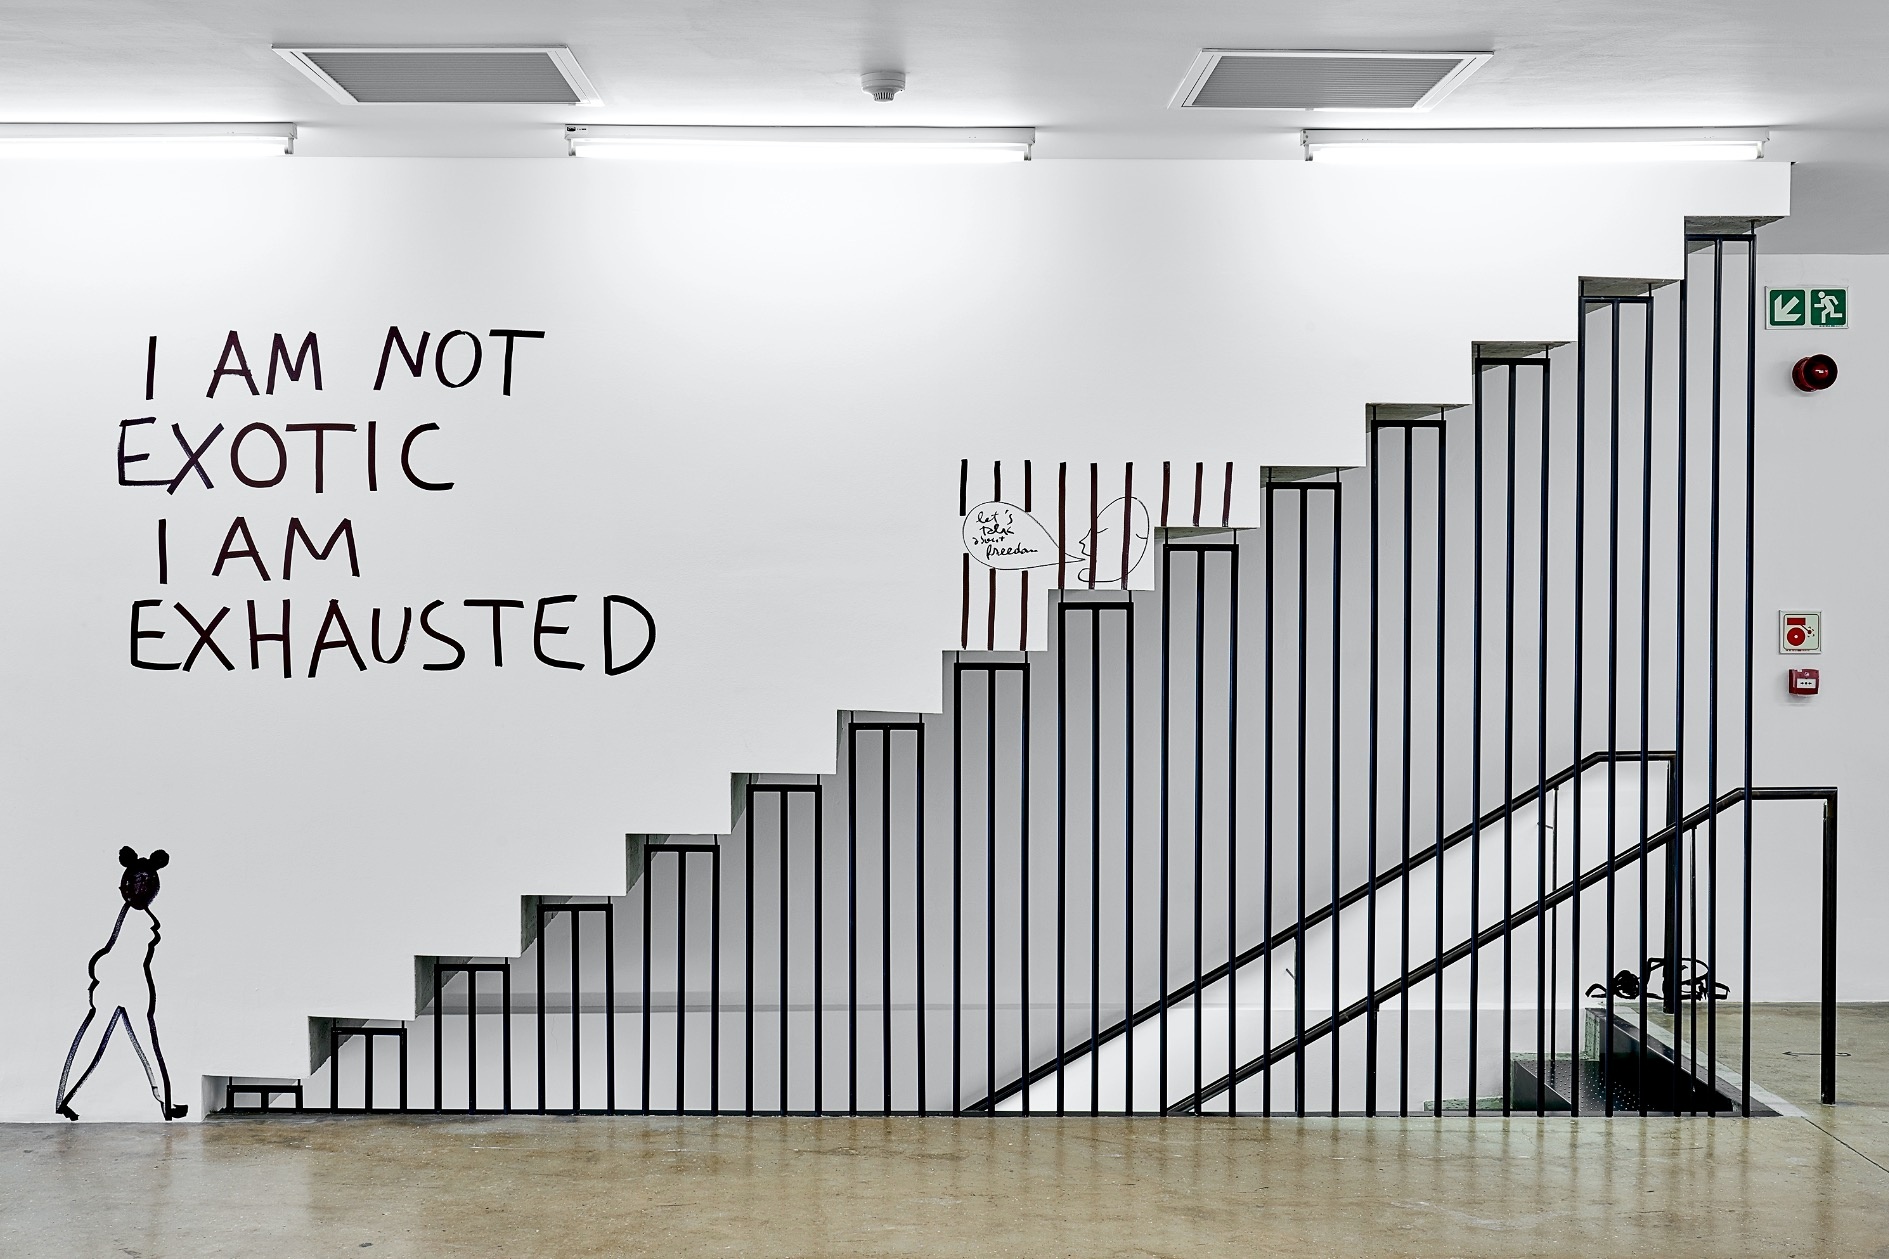 Installation photograph from Dan Perjovschi’s ‘The Black and White Cape Town Report’ exhibition in A4’s Gallery that depicts a sidelong view of a staircase. On the right, the descending stairway is visible through black guardrails. On the left, the white wall features black pen marker text that reads ‘I AM NOT EXOTIC, I AM EXHAUSTED’, with a humanoid figure below it.
